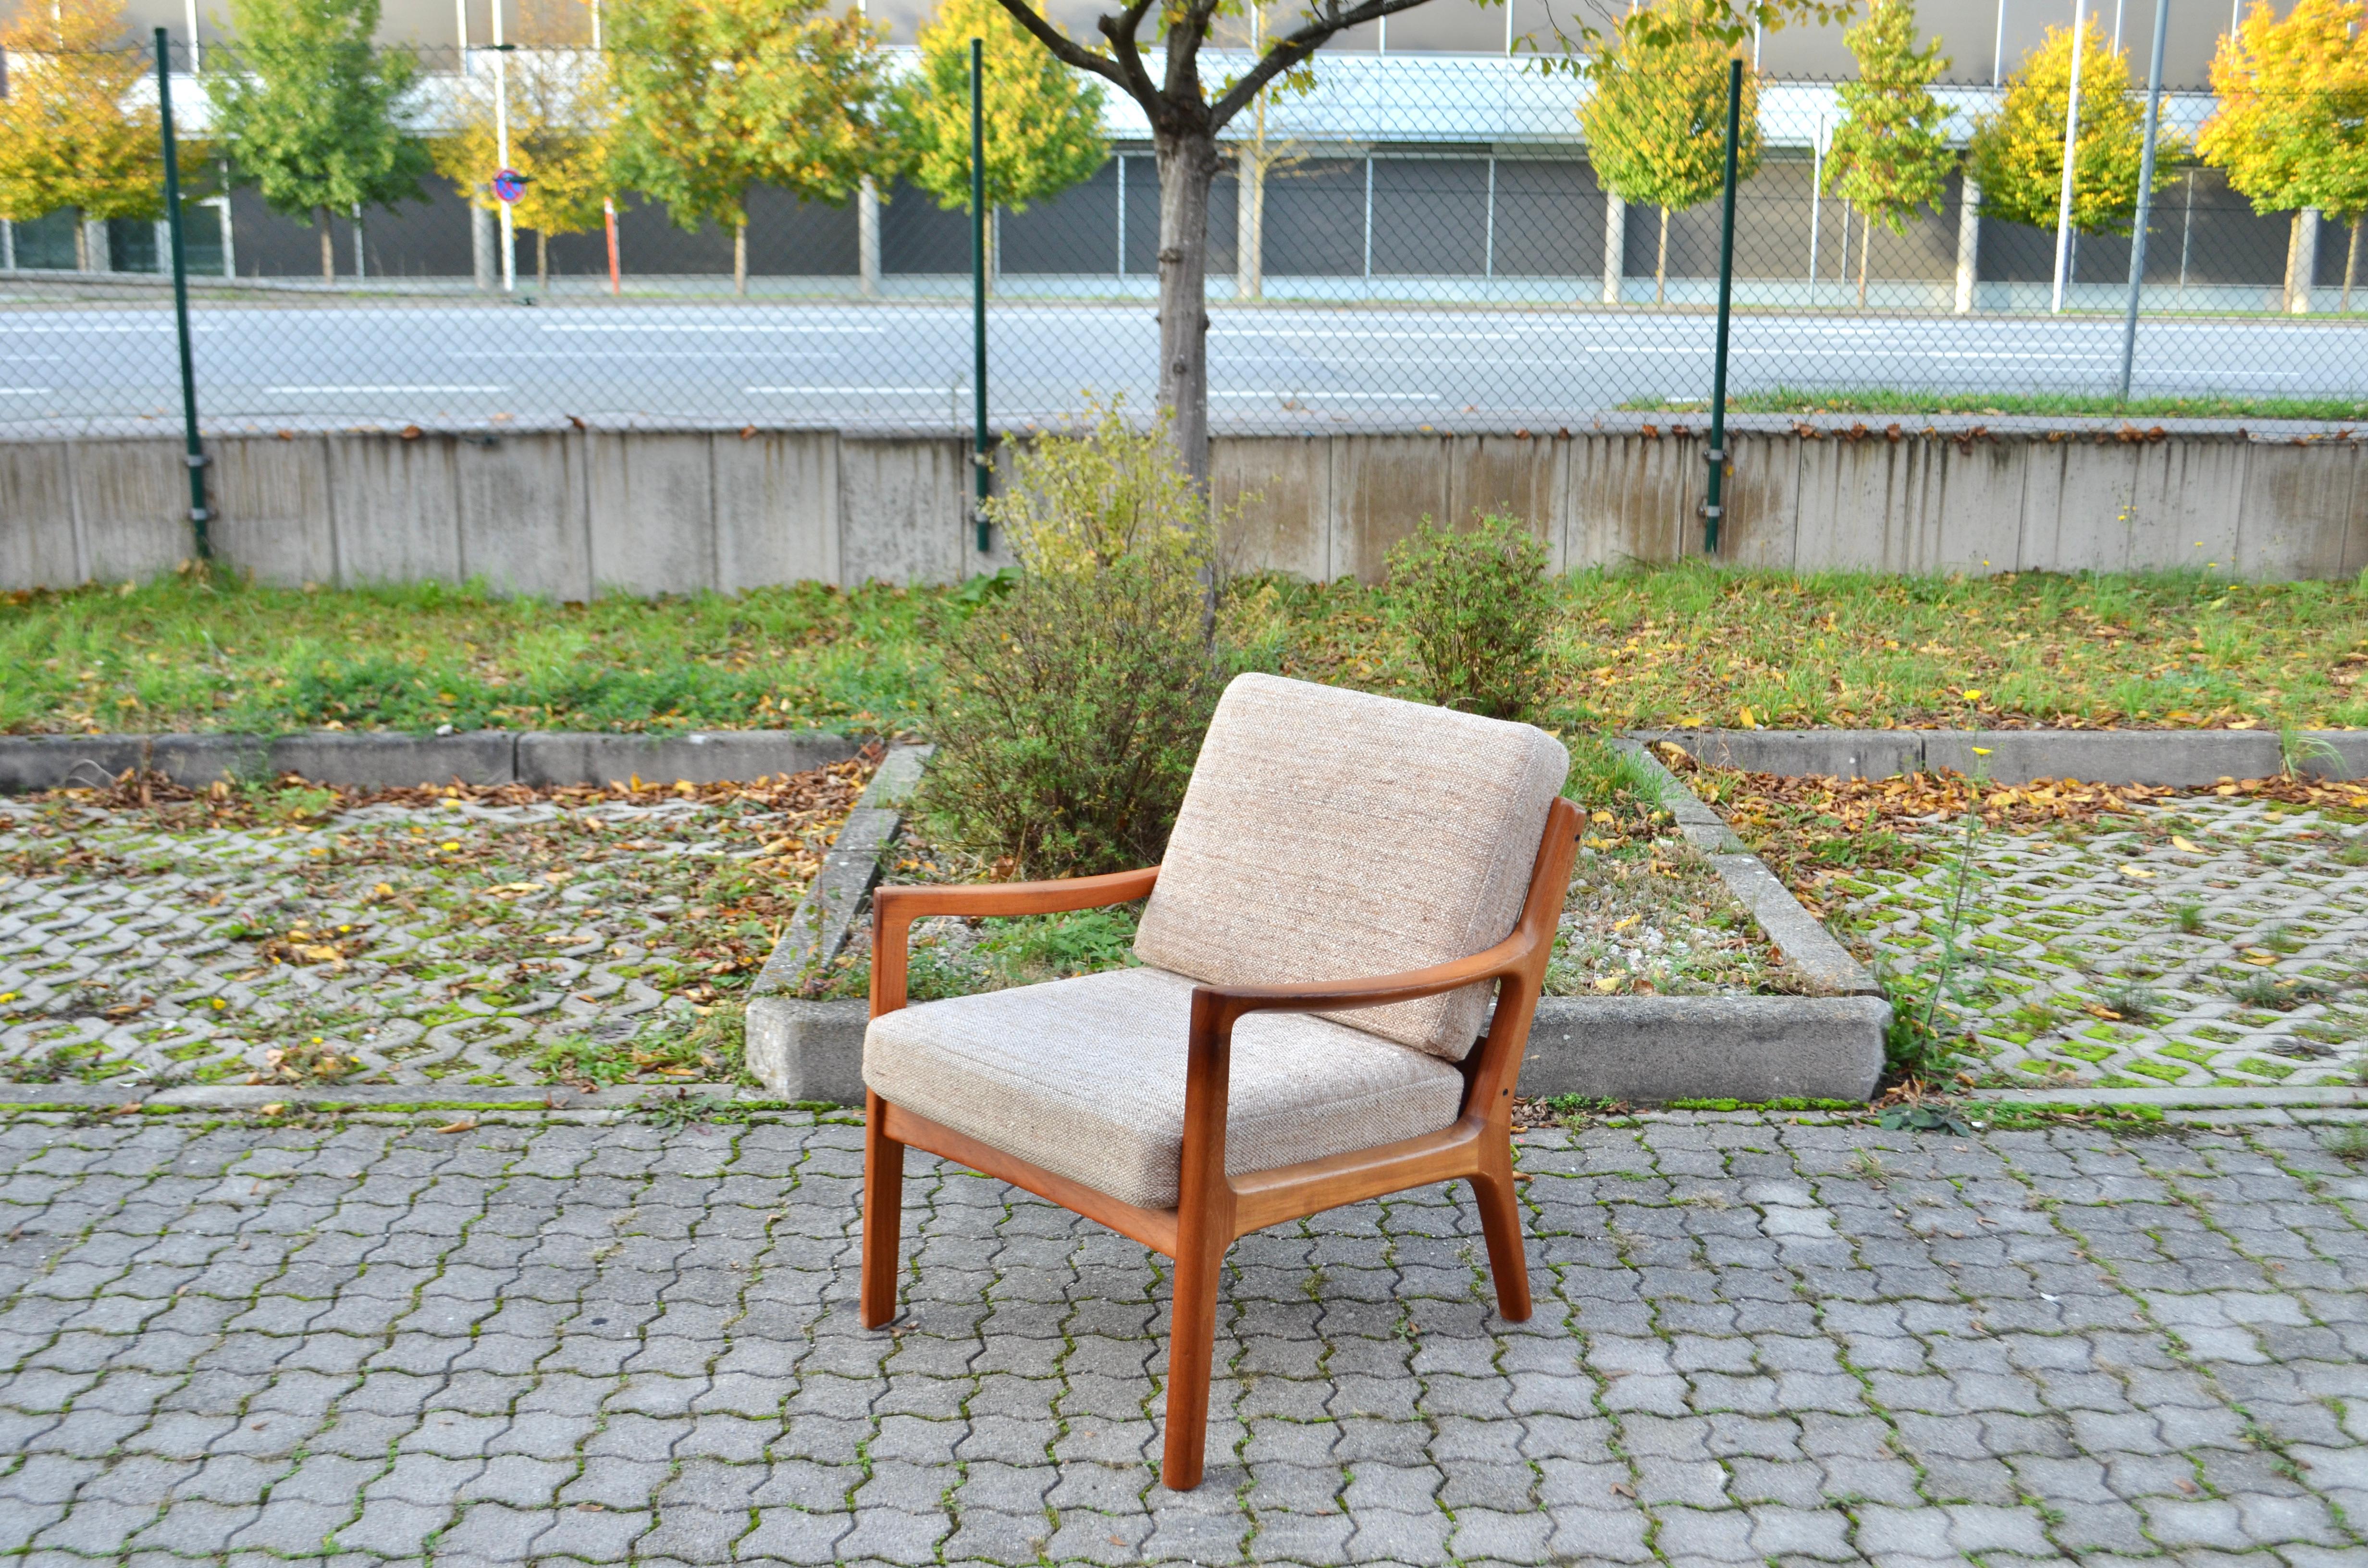 Ole Wanscher  Modell Senator Easy chair in teak wood.
Produced by France & Son / France Daverkosen
The fabric is made of wool and it is everything in original condition.
Great condition.
